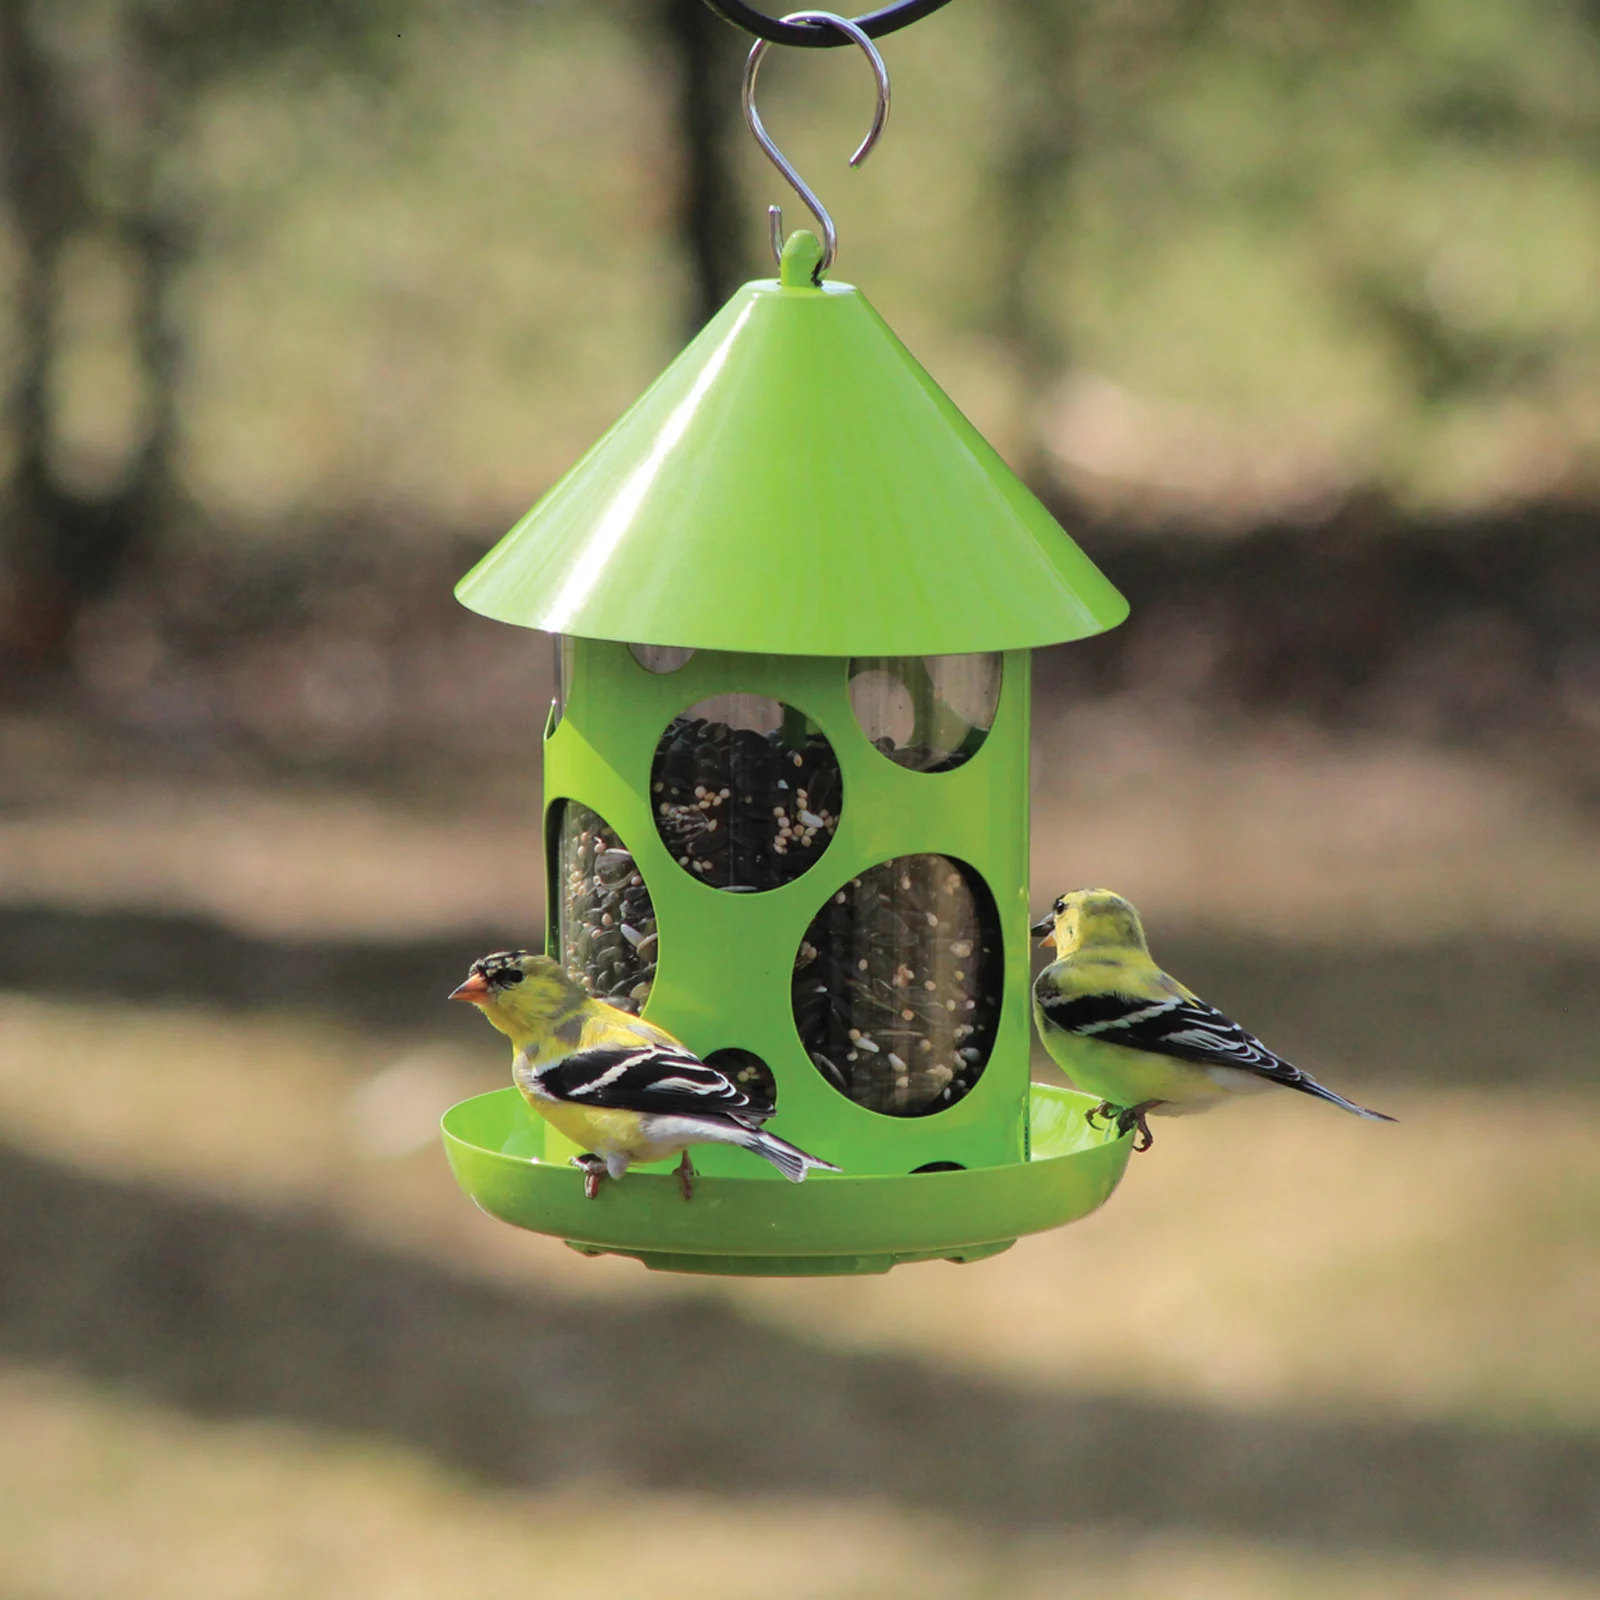 Two birds at a nyjer bird feeder